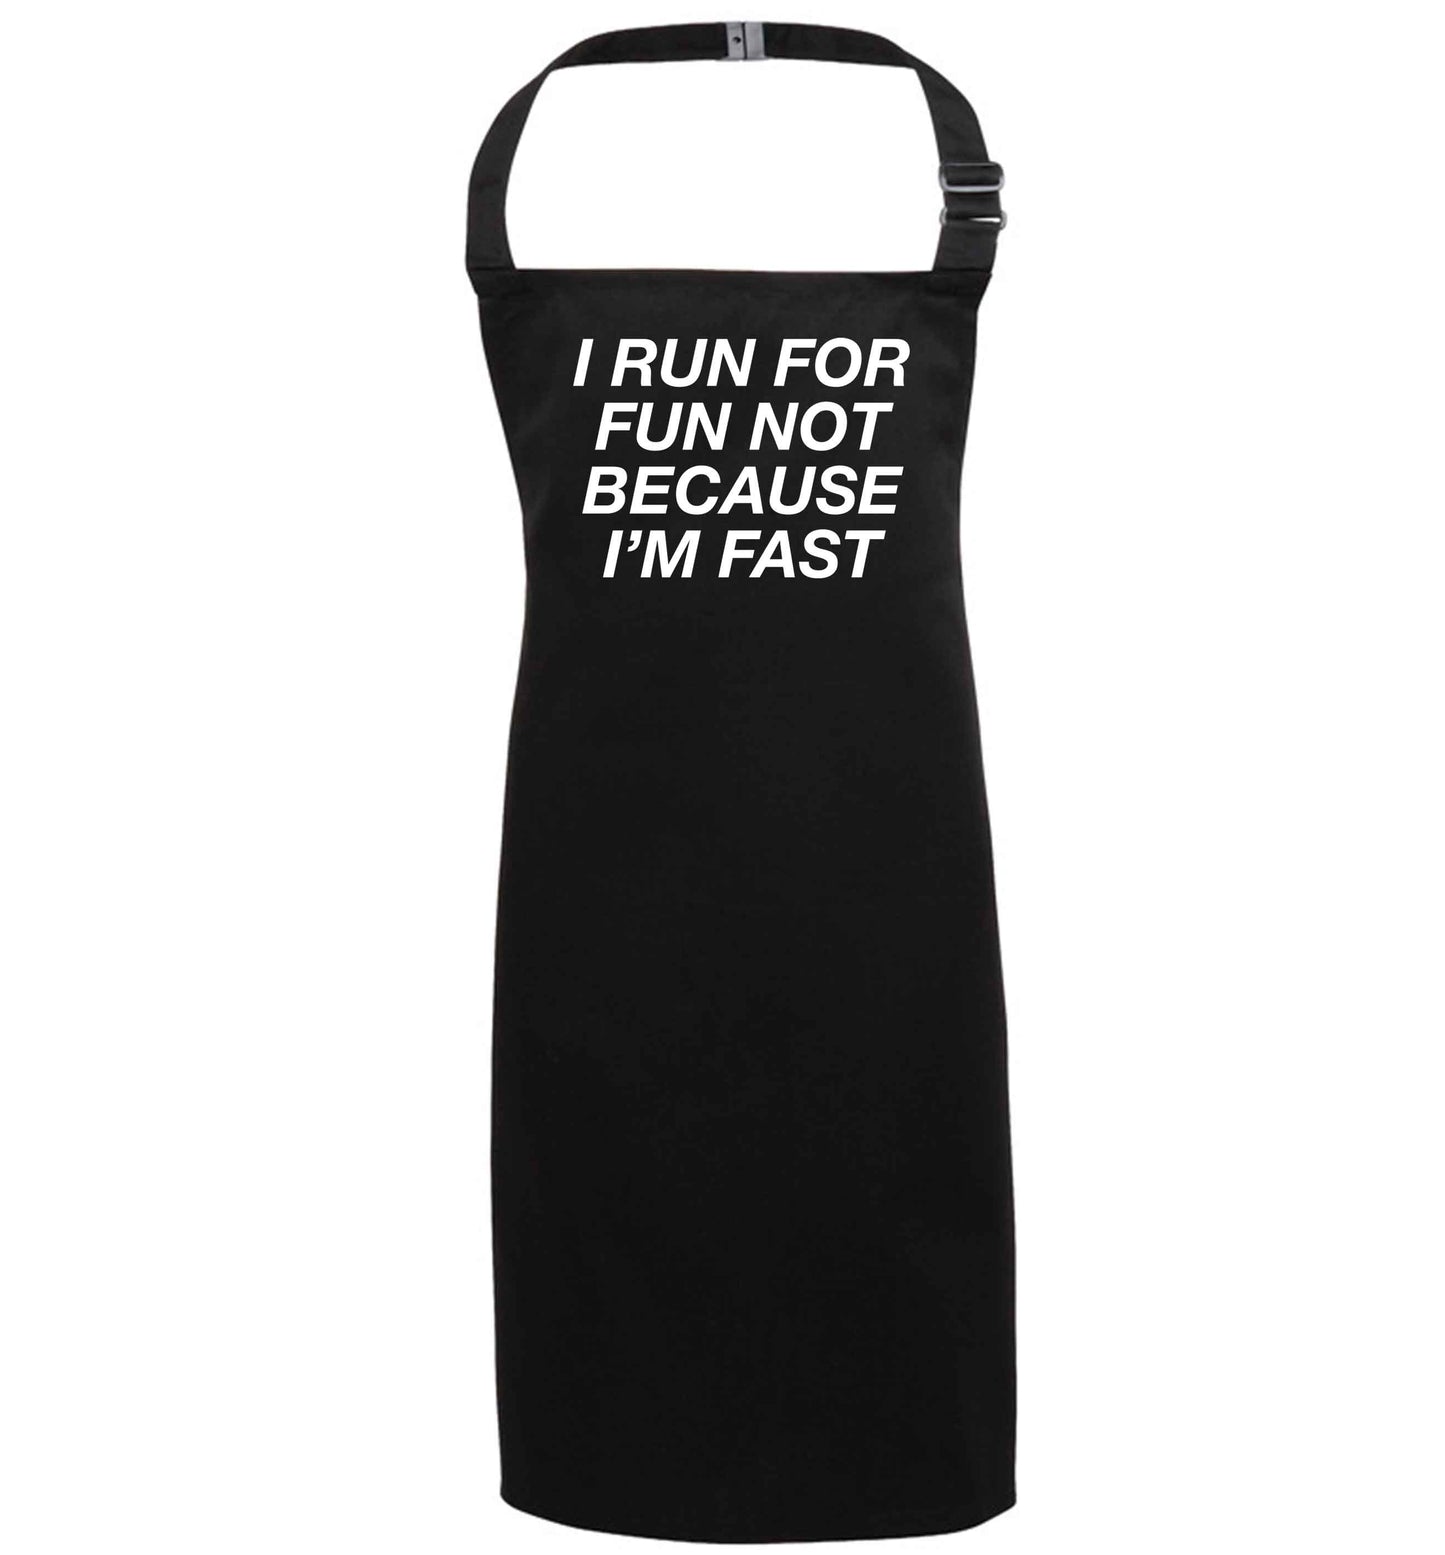 I run for fun not because I'm fast black apron 7-10 years